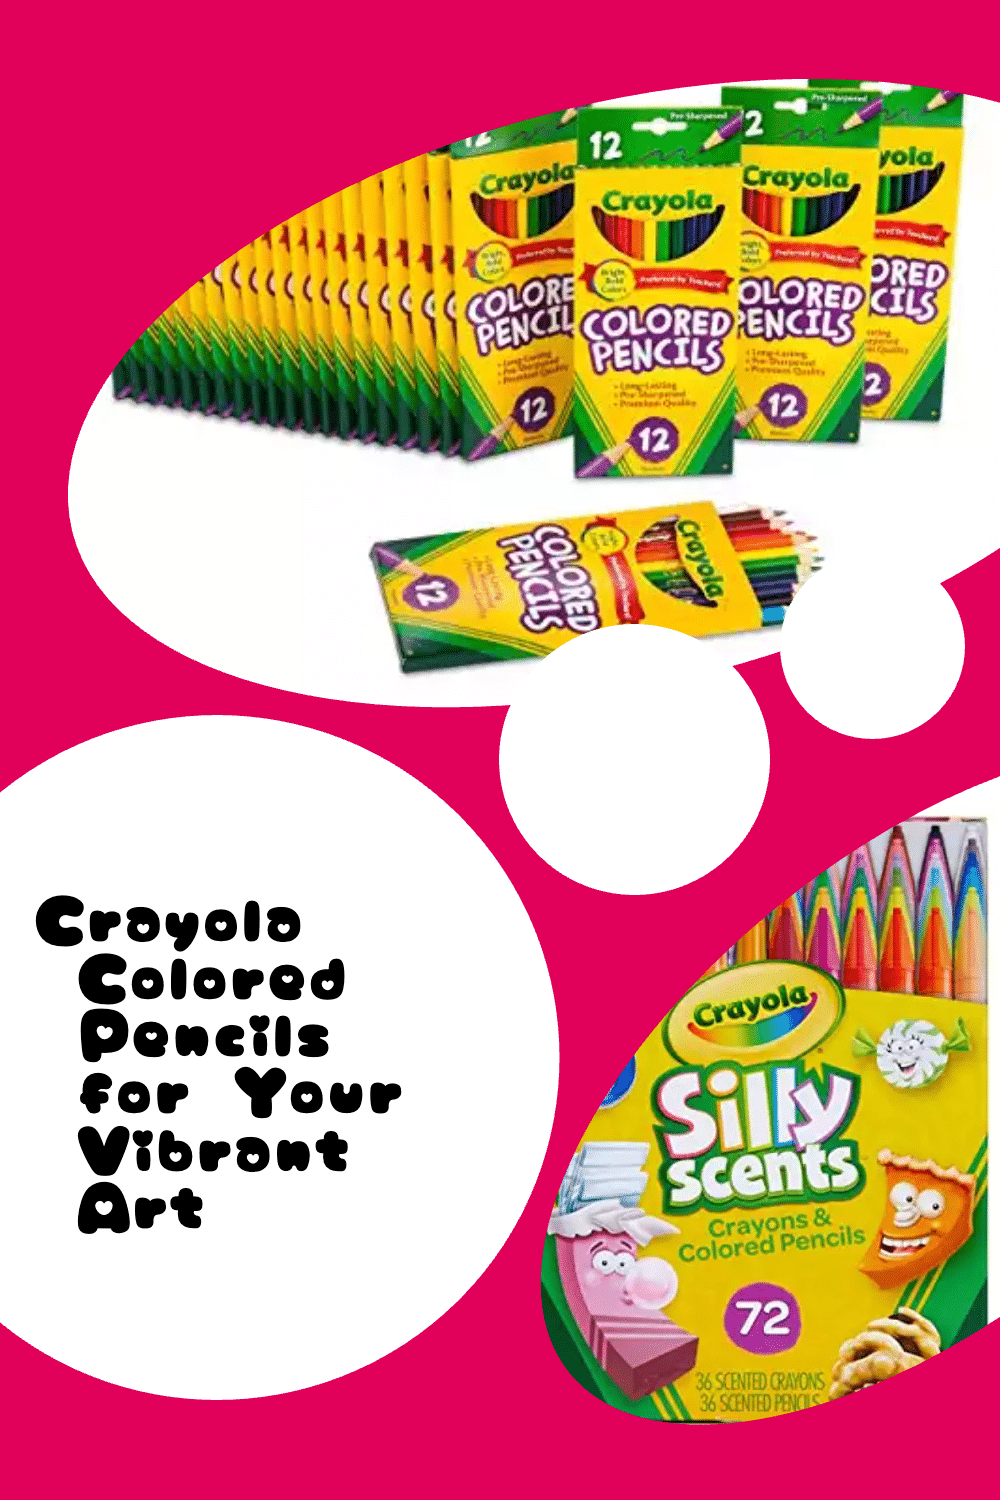 Crayola Colored Pencils for Your Vibrant Art